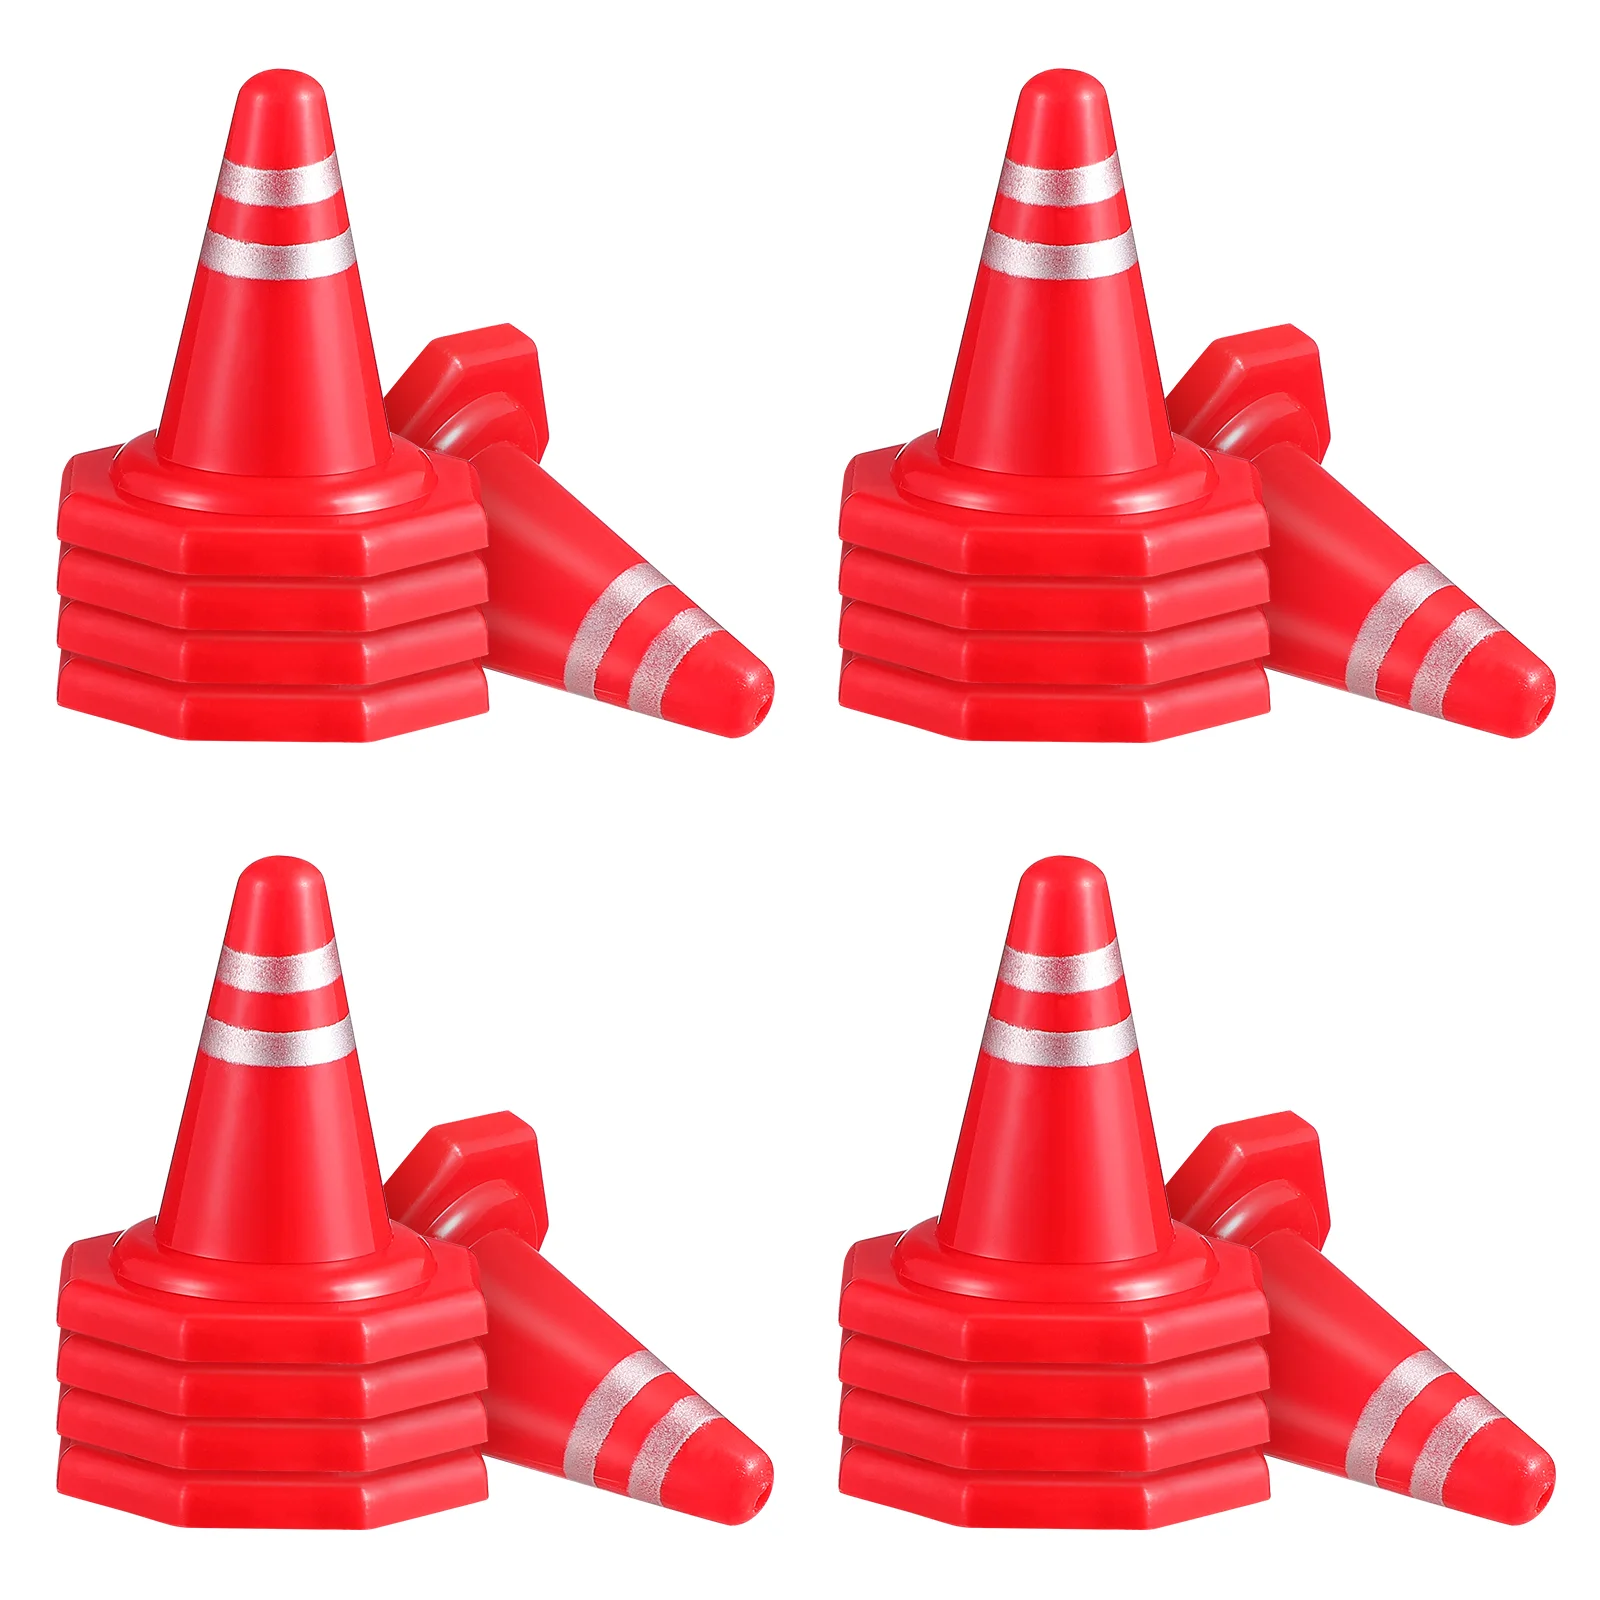 Sandbox Barricades Mini Roadblock Emblems Signs for Kids Children’s Childrens Toyss Transportation Puzzle Simulated Traffic 7 pcs roadblock sand table model tiny traffic cones the sign plastic signs abs construction